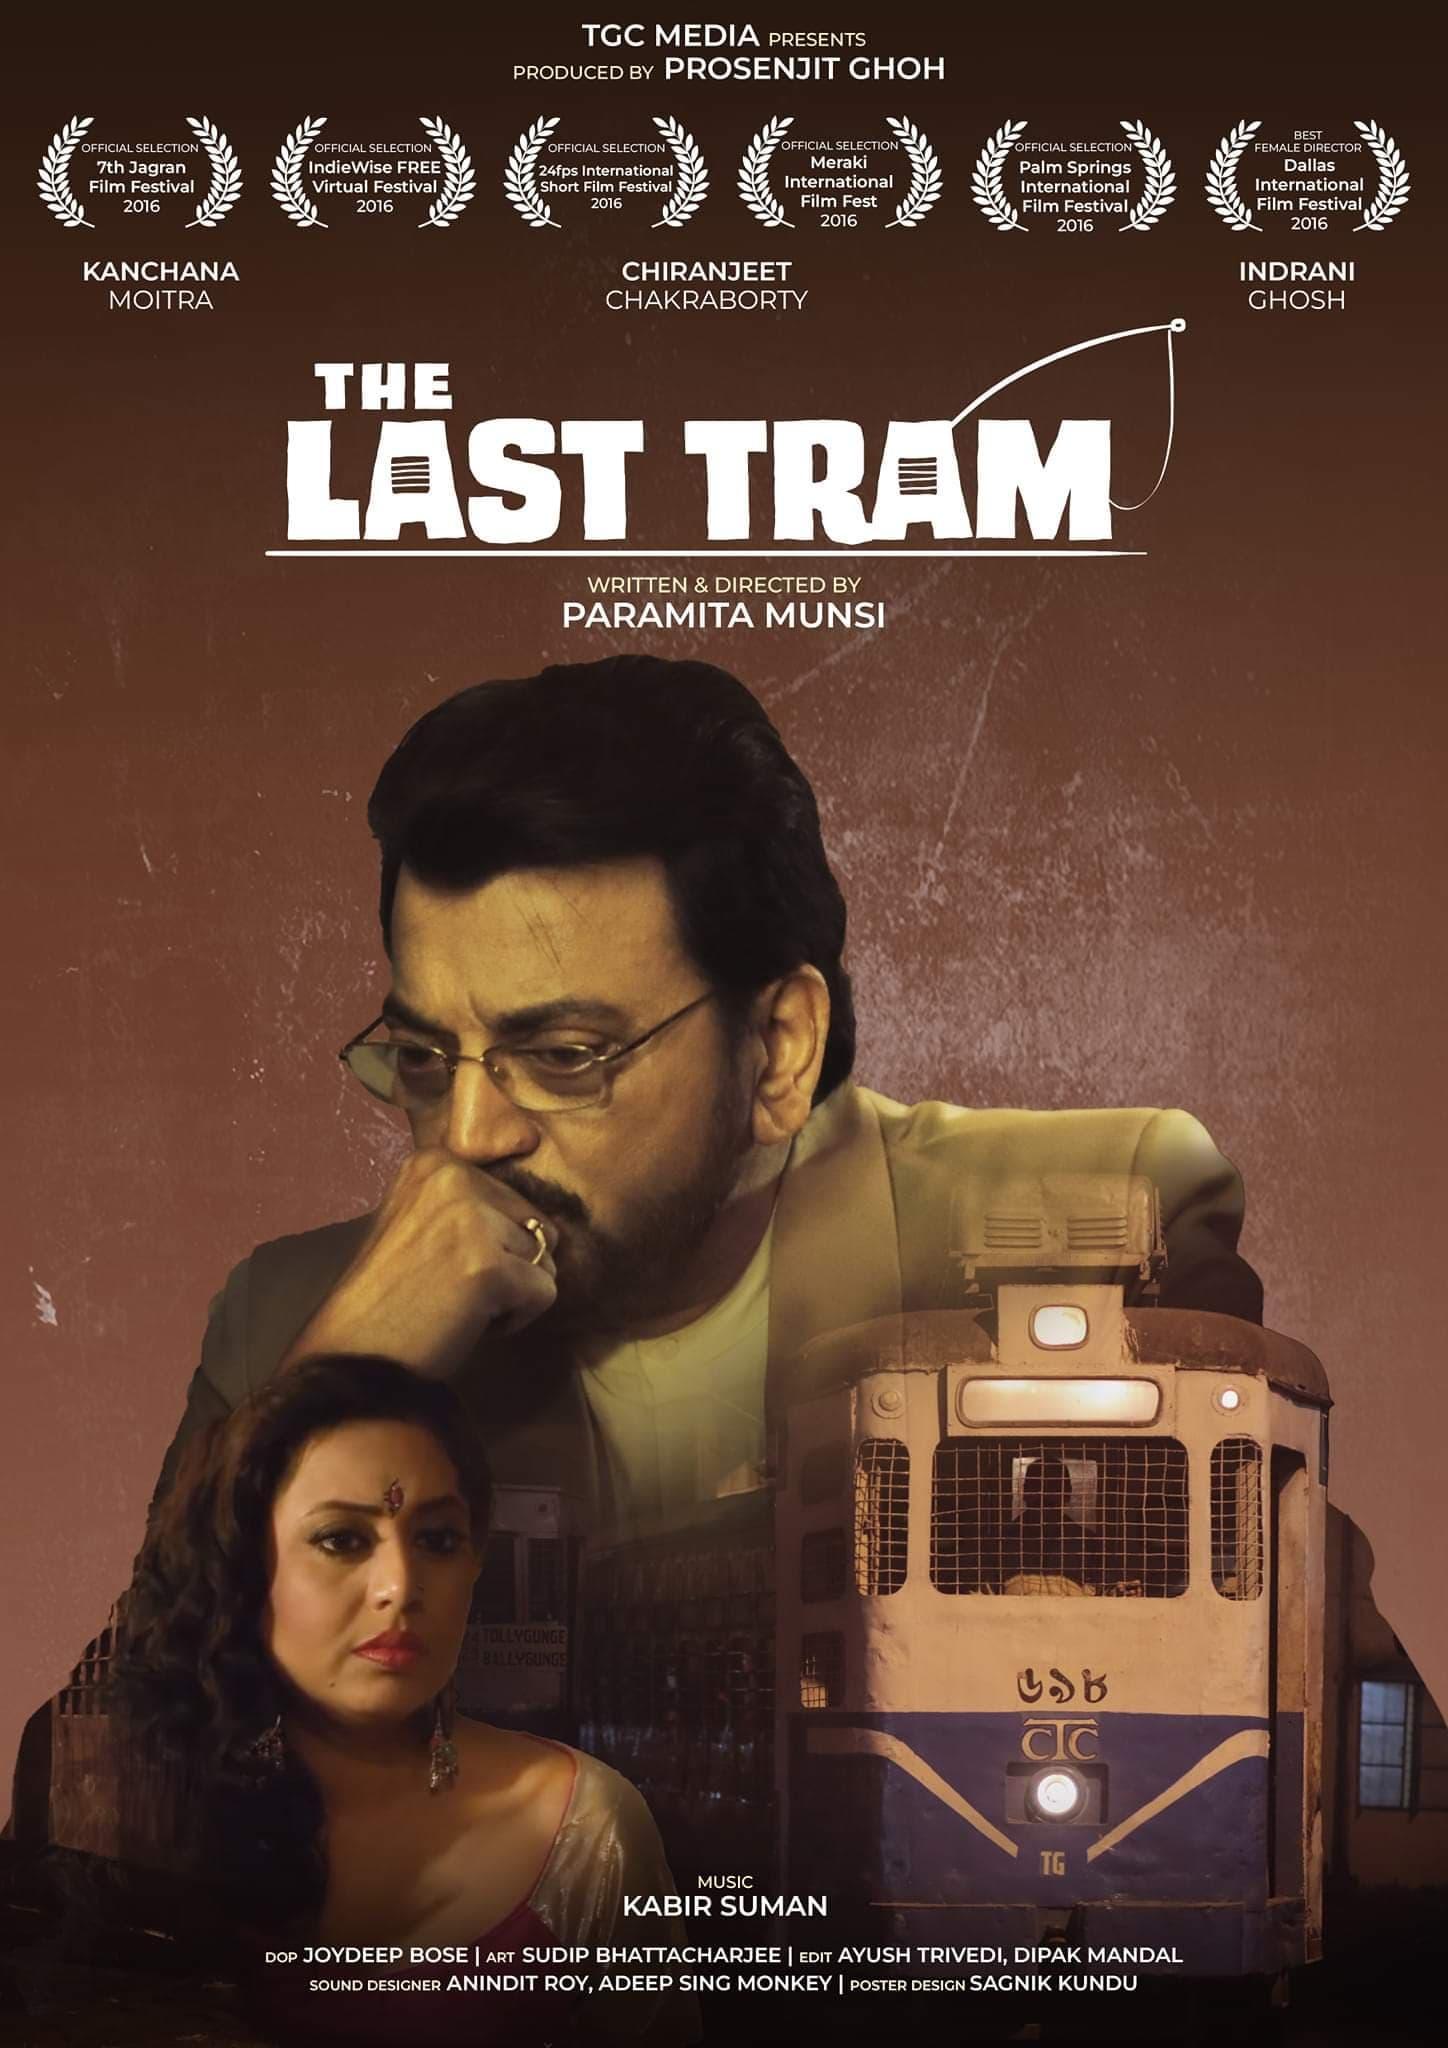 The Last Tram poster